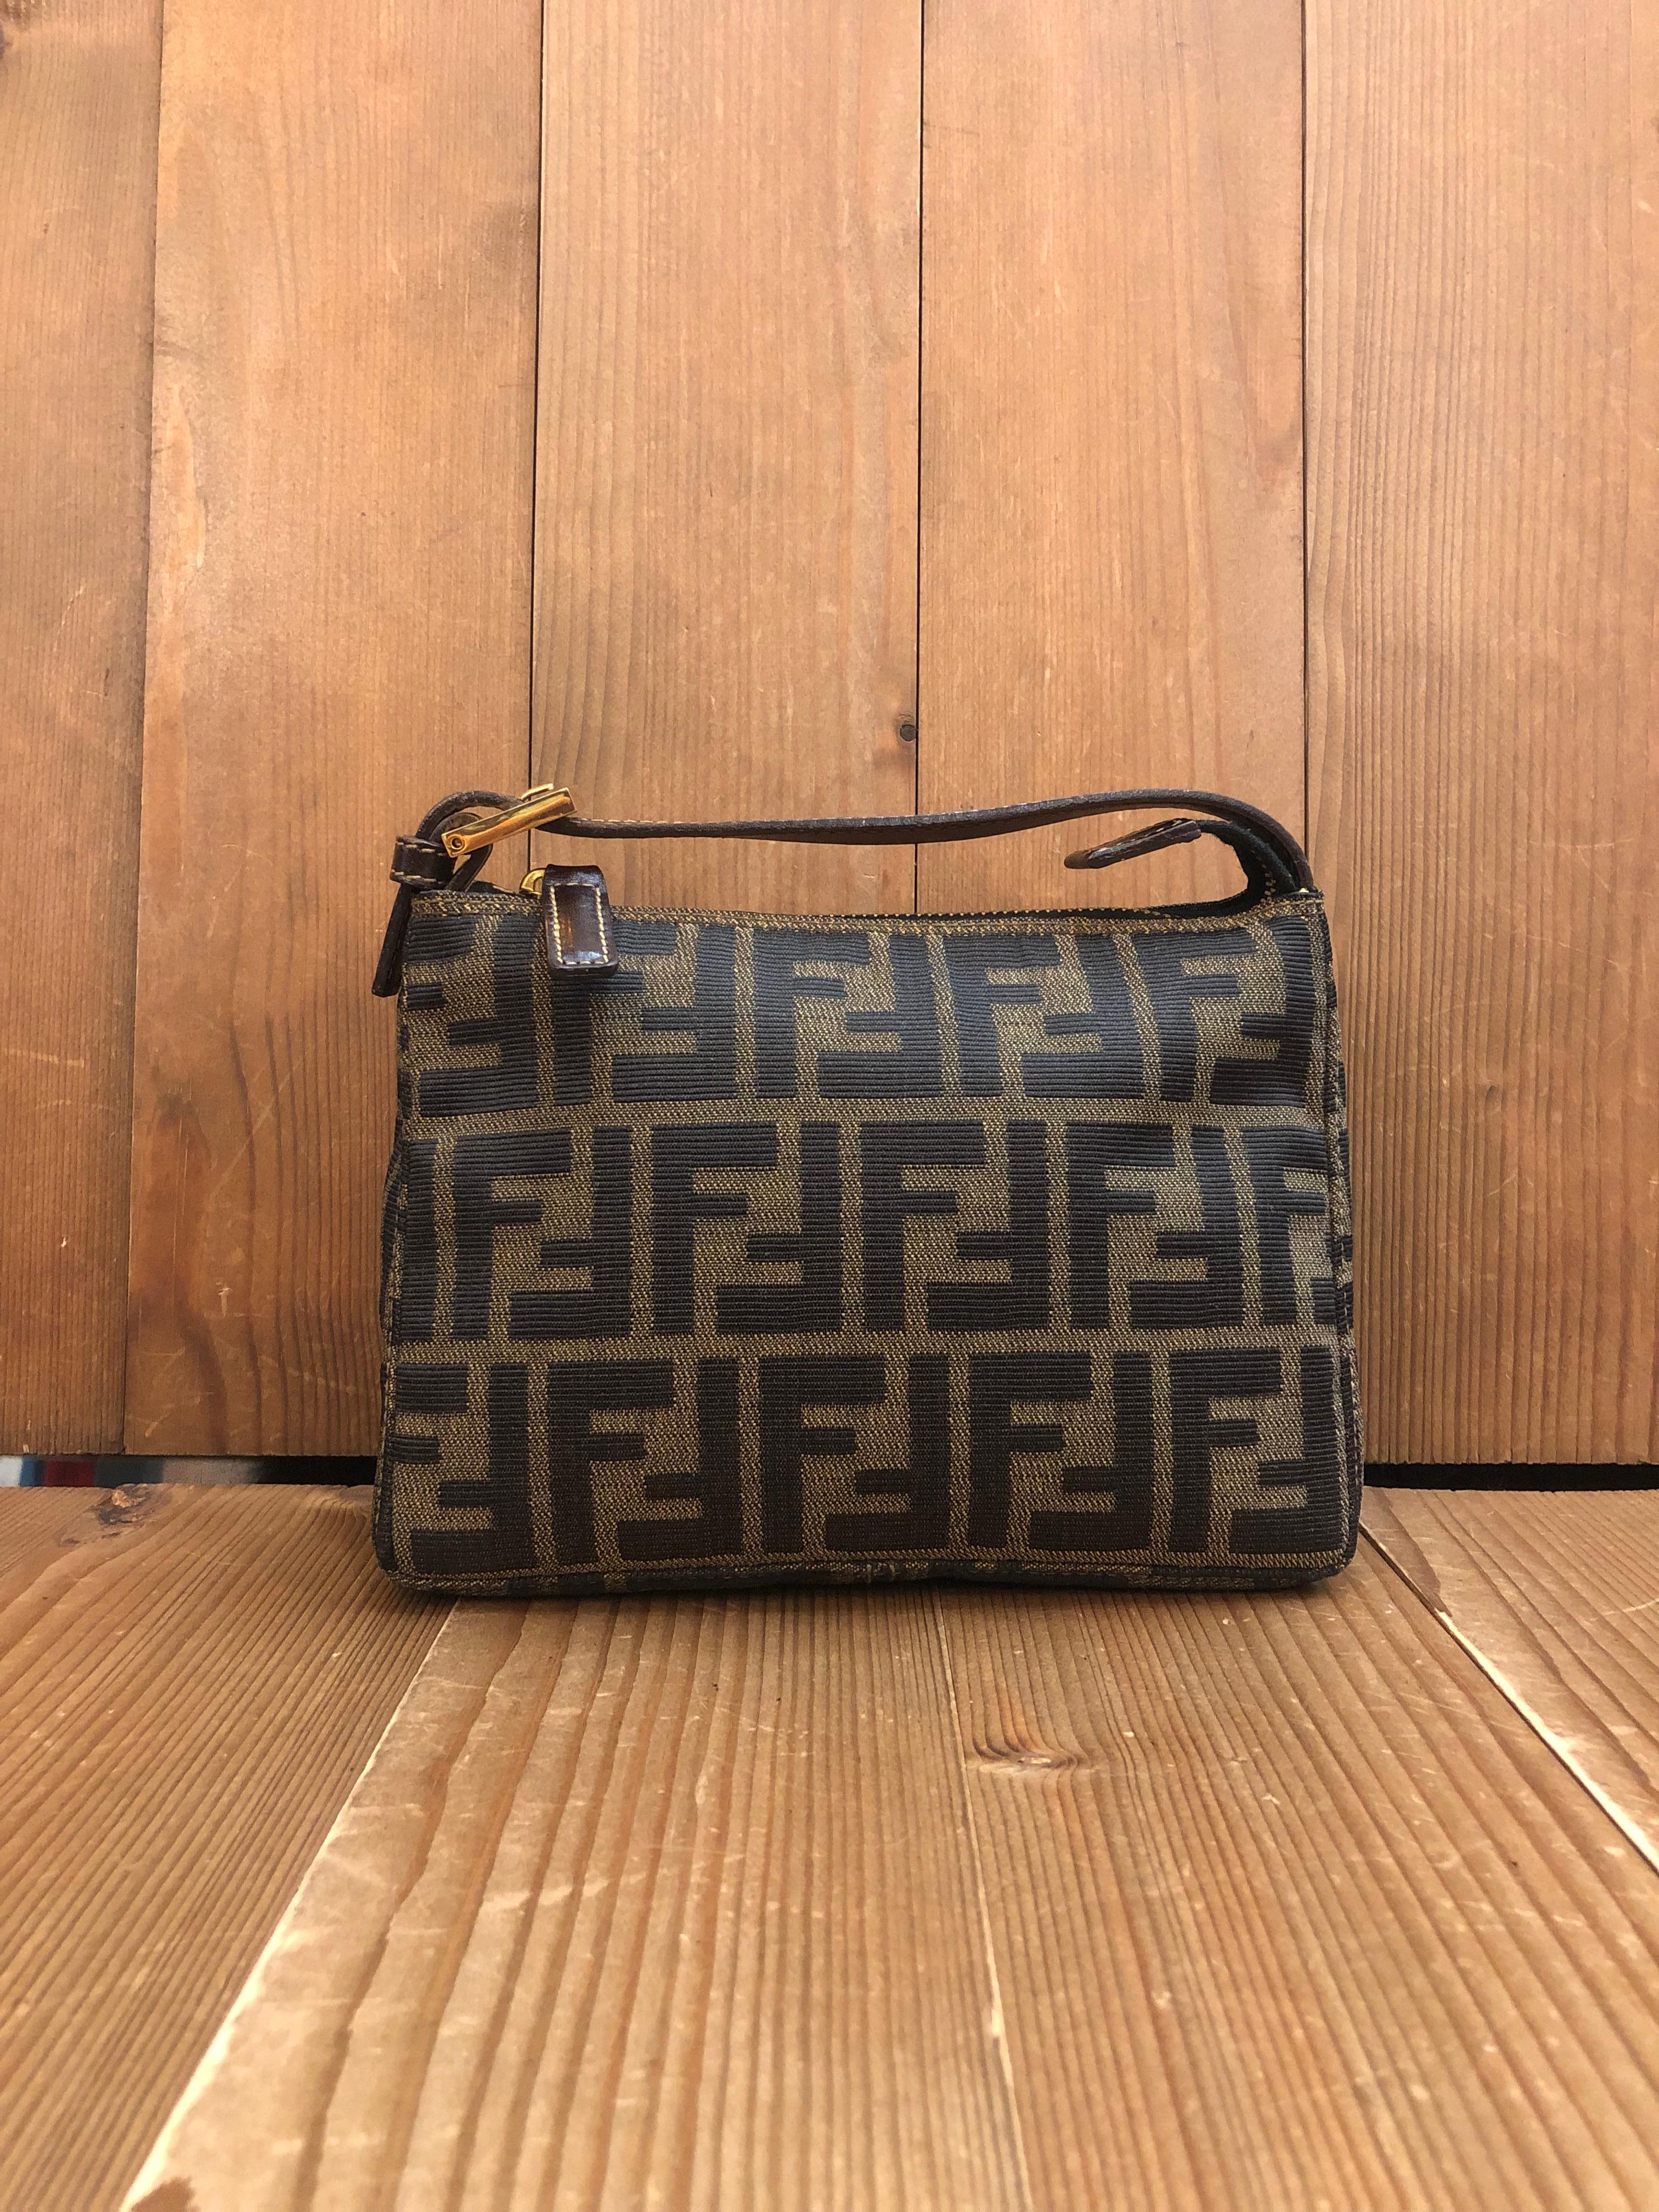 This vintage FENDI mini pouch handbag is crafted of Fendi's iconi Zucca jacquard in brown/black trimmed with brown leather featuring gold toned hardware. Zipper top closure opens to a new beige interior. Made in Italy. Measures 7.25 x 5.25 x 3